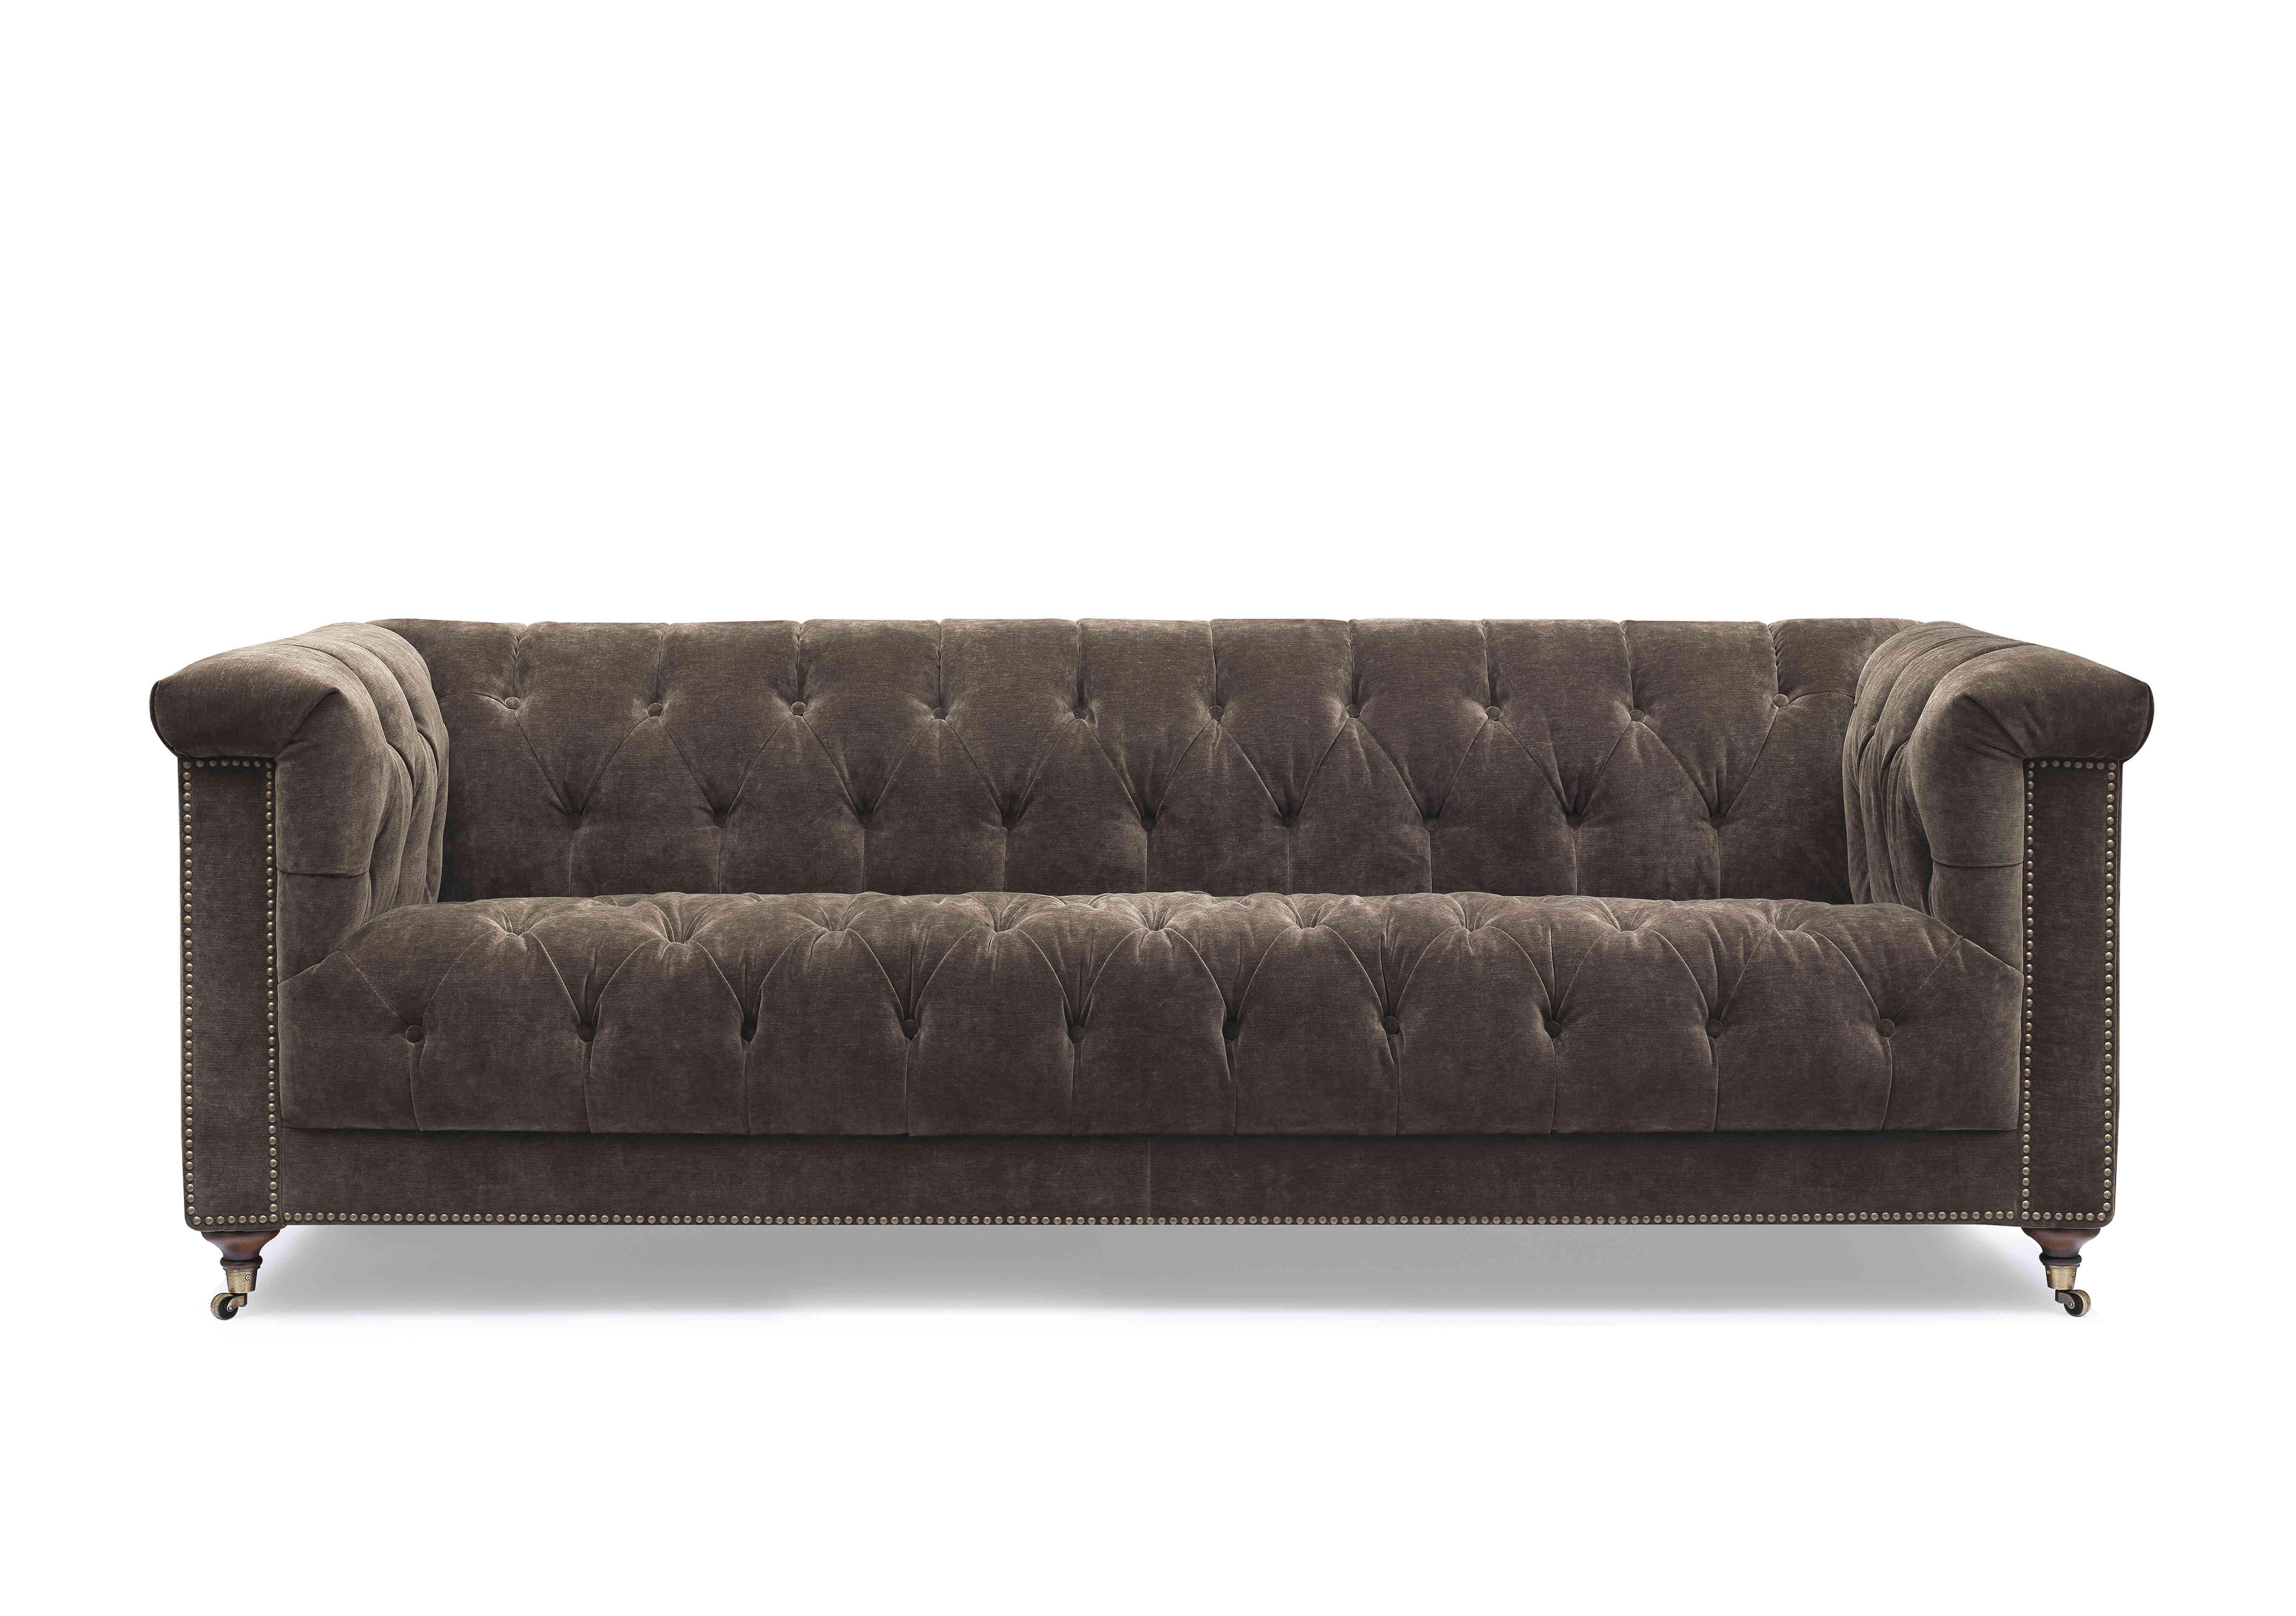 Wallace 4 Seater Fabric Chesterfield Sofa in X3y1-W020 Brindle on Furniture Village